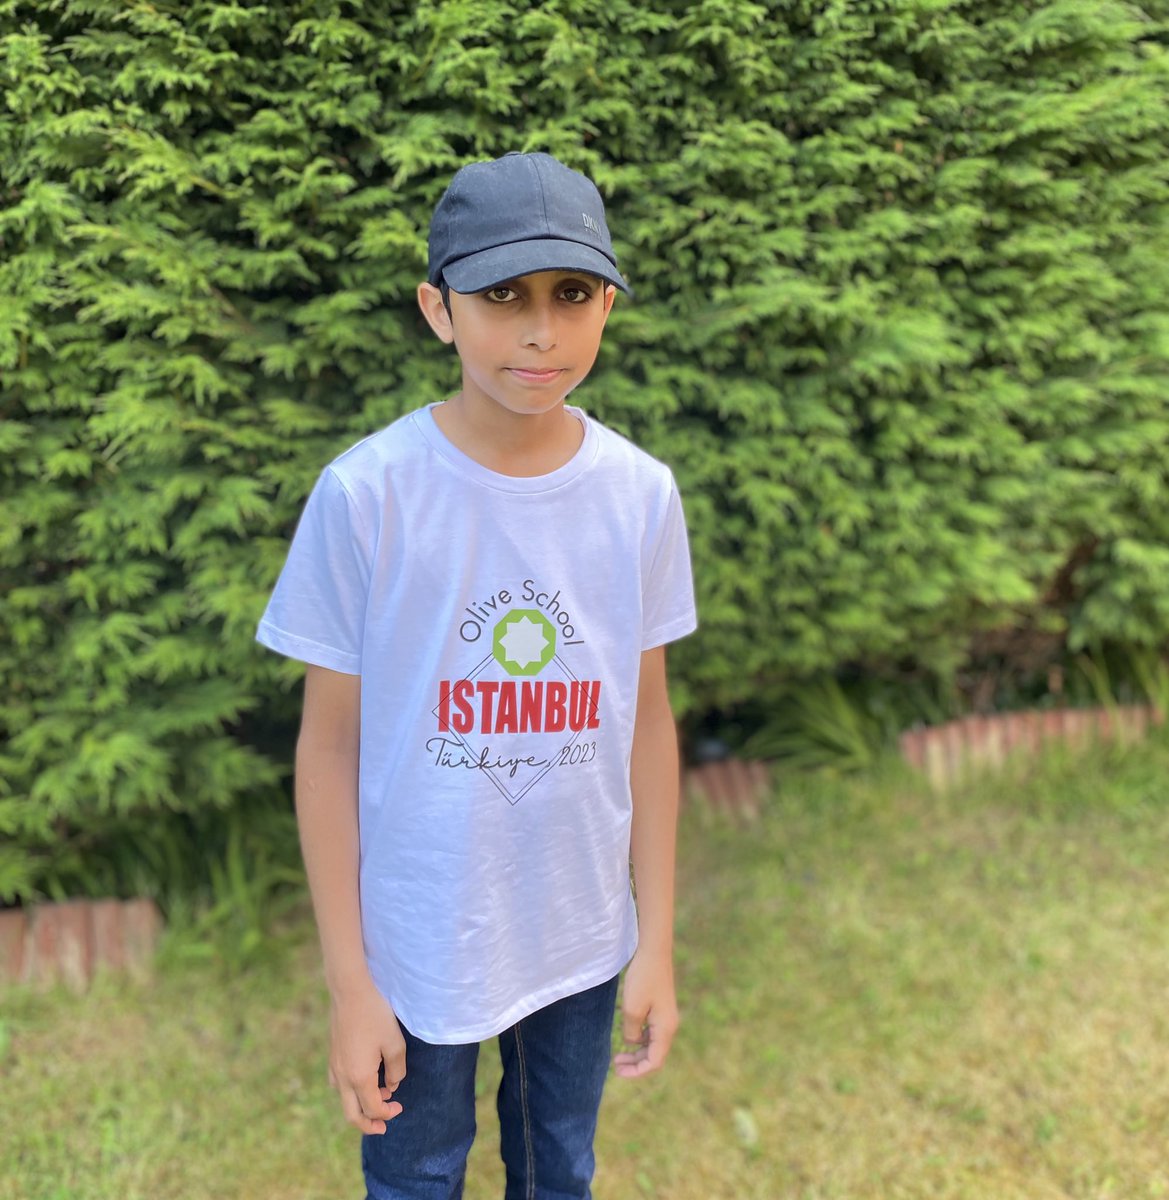 “Off he goes on his first big adventure with @olive_bburn #memories and experiences he will forever cherish.
Pray he goes safely and returns back safely #InshaAllah” #Alhamdulillah #Istanbul #Turkiye #Year6 #SchoolTrips #MakingMemories #WeAreStar @StarAcademies